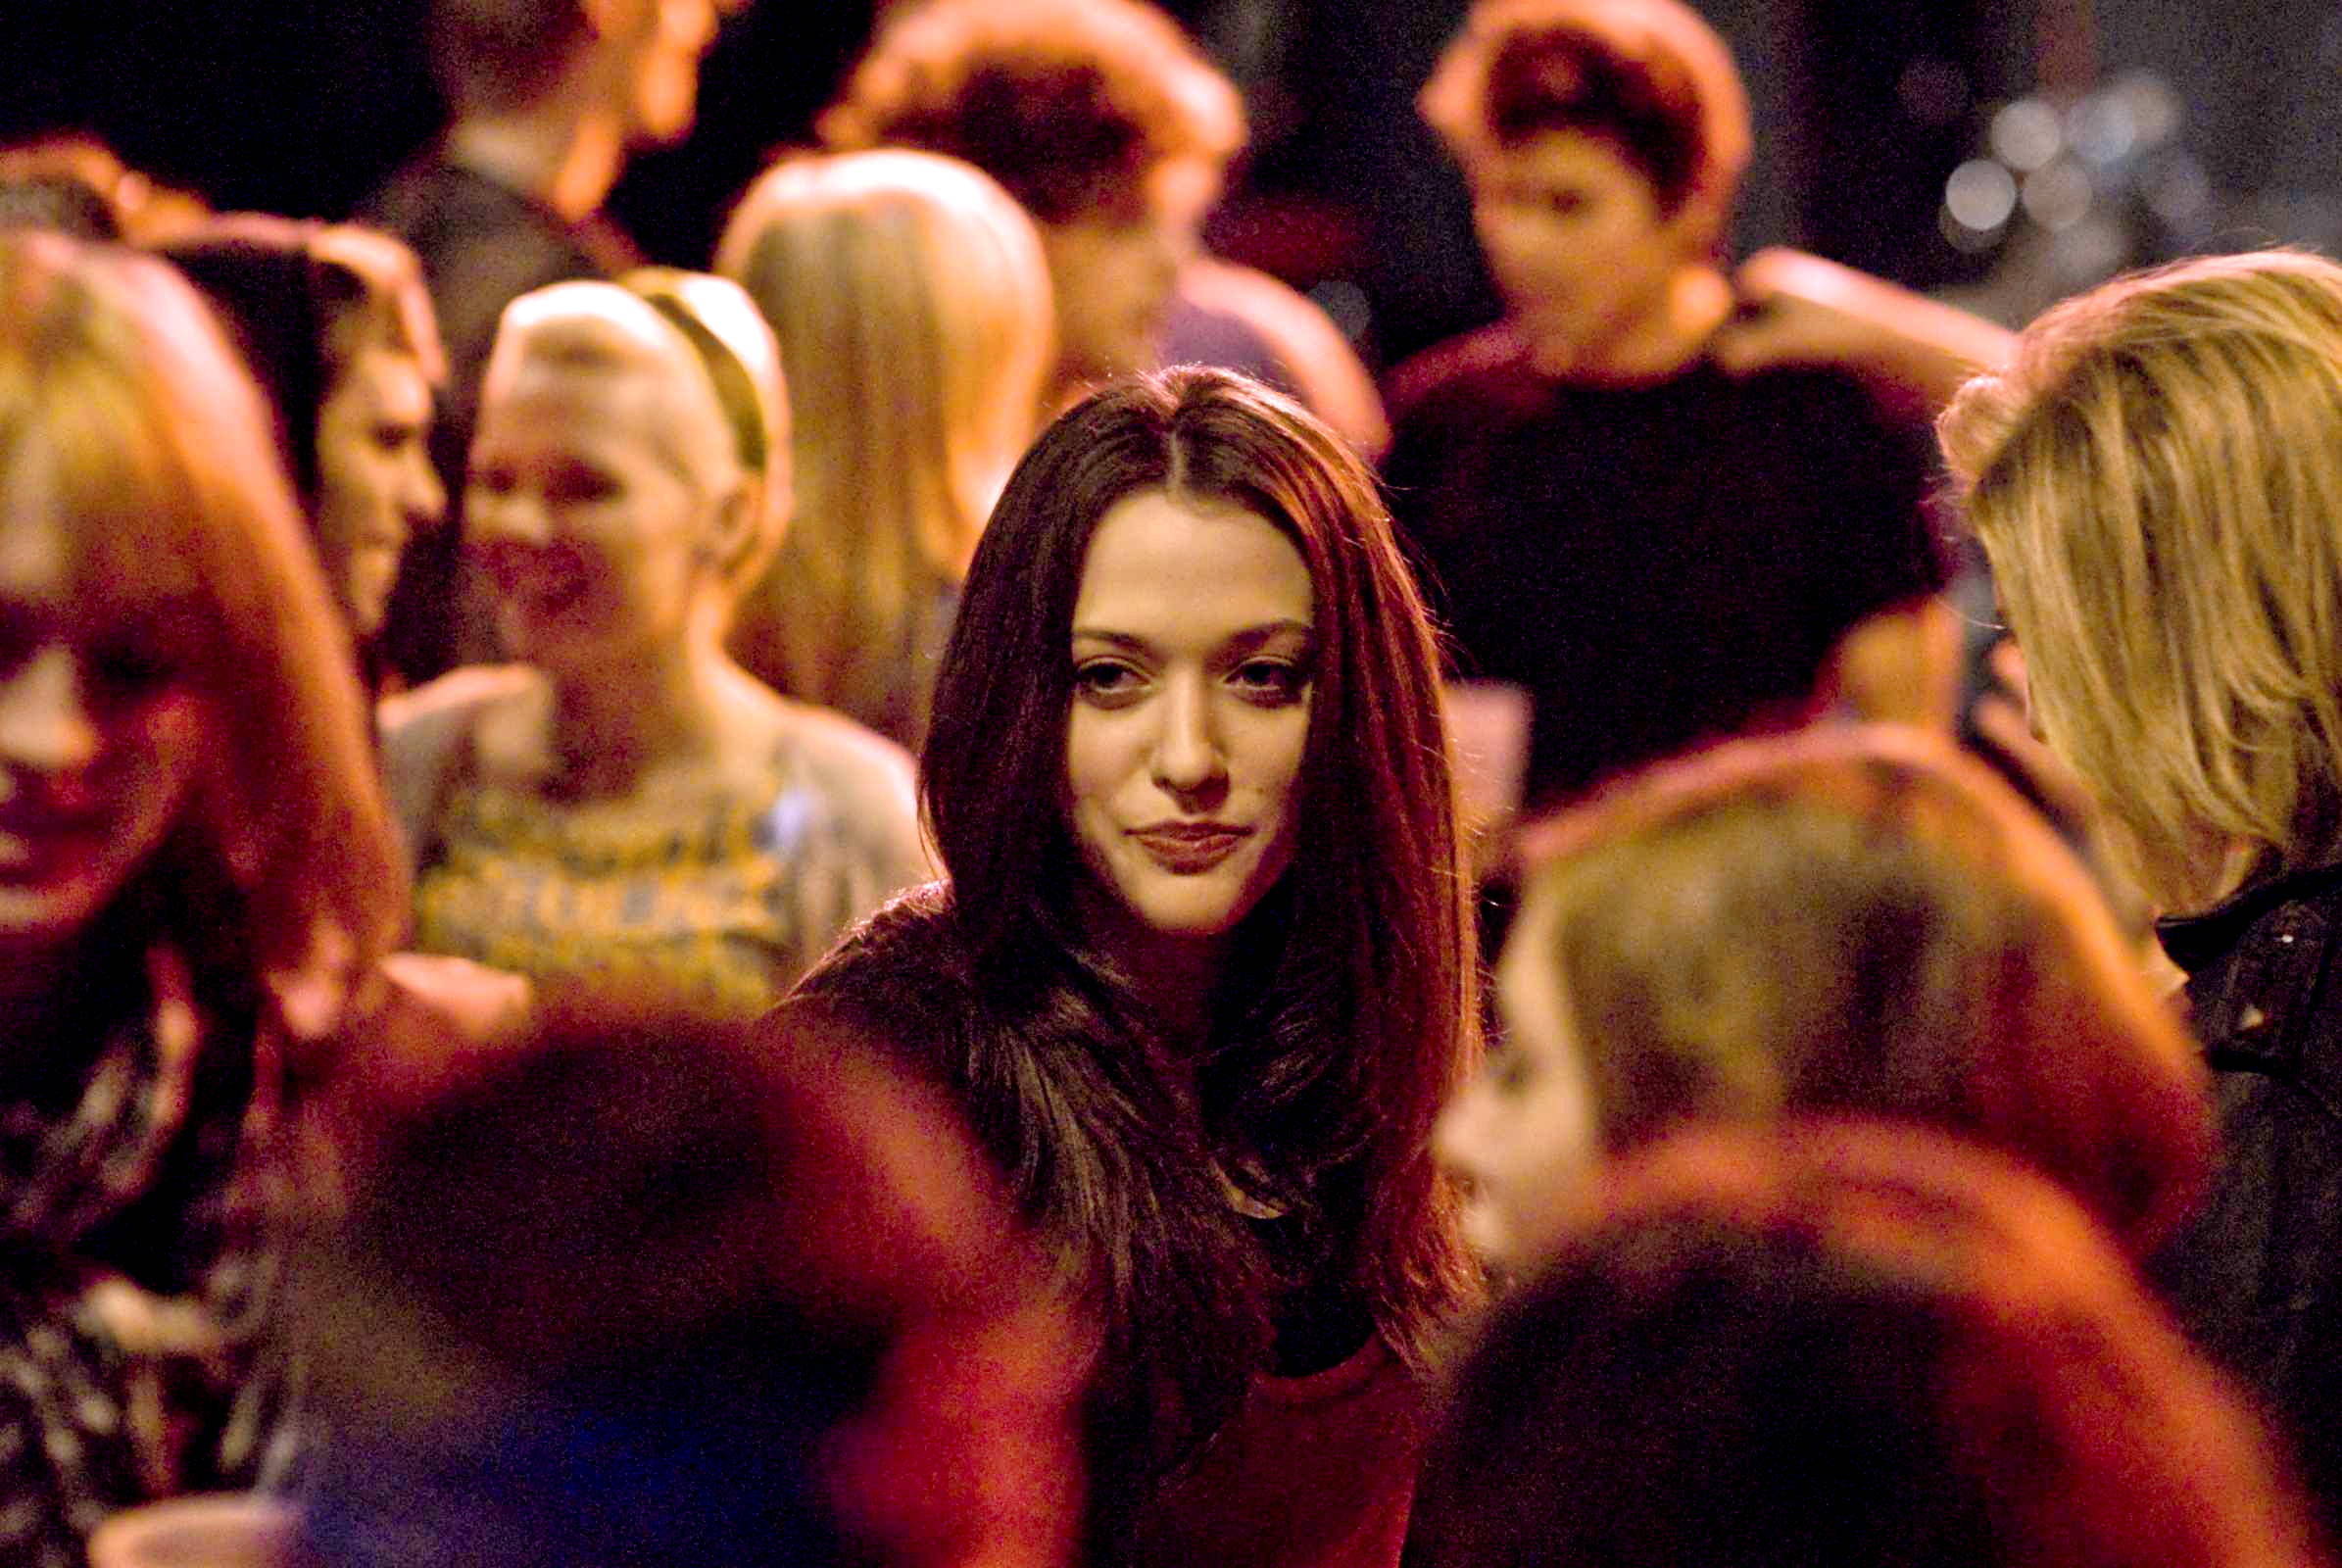 Kat Dennings stars as Norah in Sony Pictures' Nick and Norah's Infinite Playlist (2008). Photo credit by JoJo Whilden.